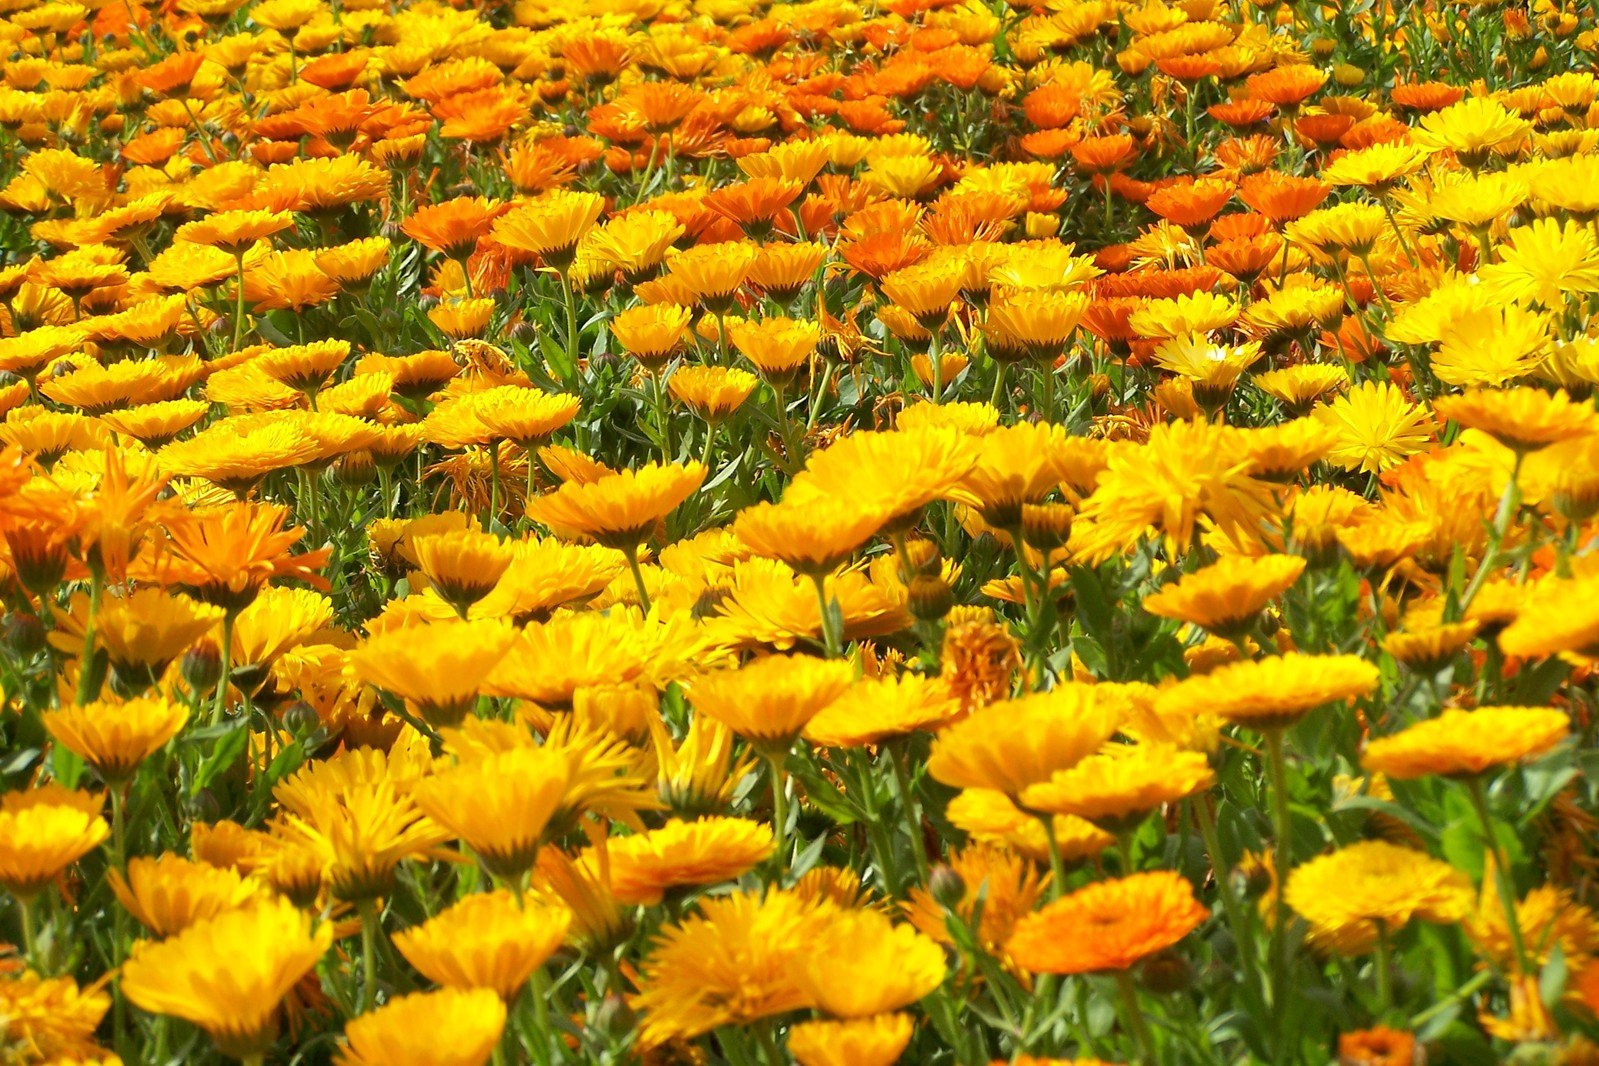 a field full of yellow and orange flowers